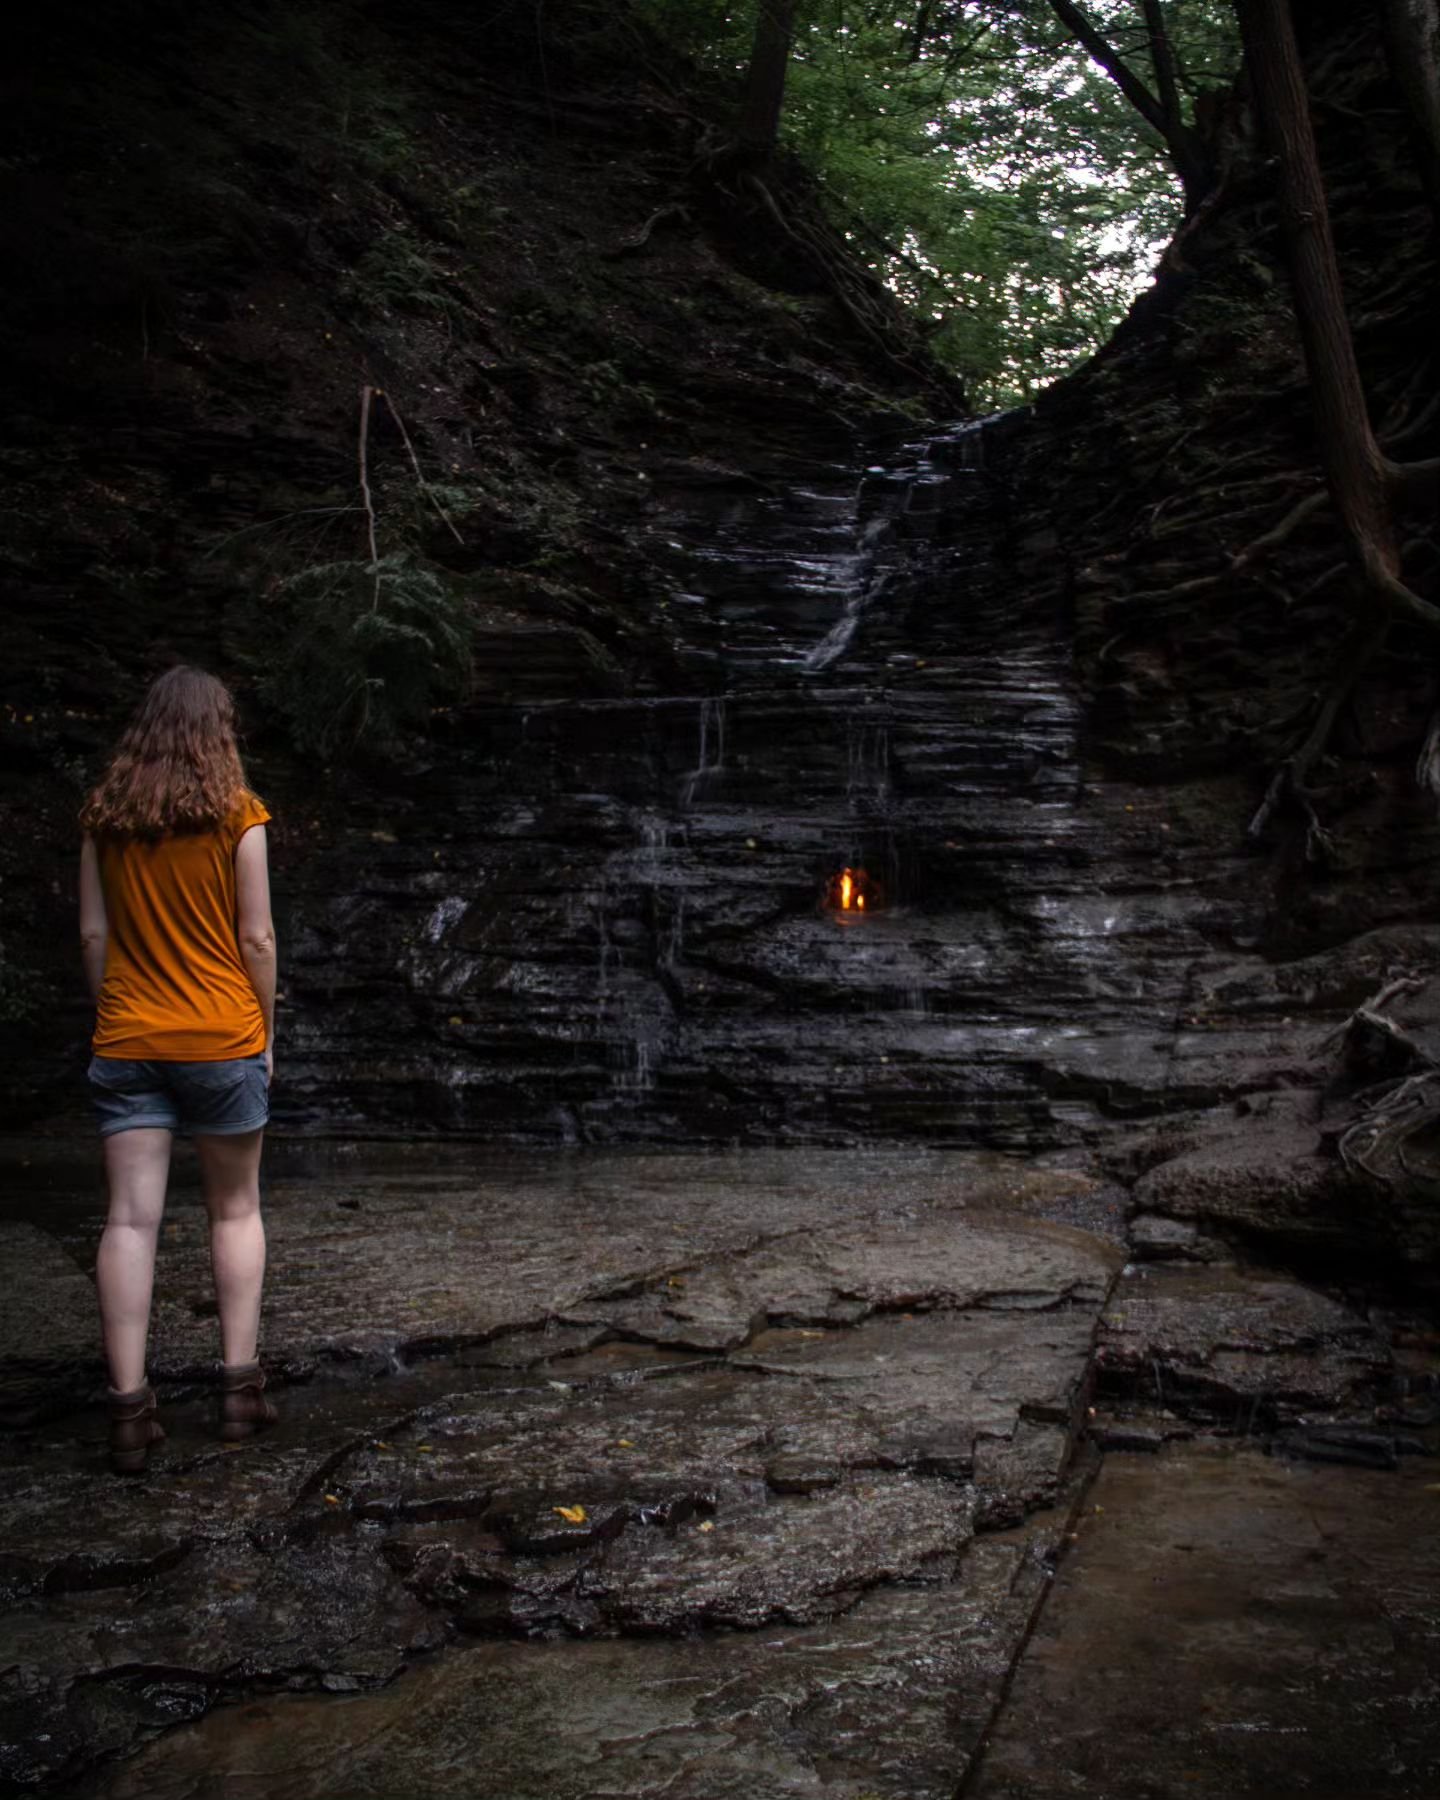 The eternal flame falls hike near Buffalo, NY!
Click the link in my bio for more fun things to do in Buffalo. 😊

#buffalony #eternalflame #eternalflamefalls #orchardpark #waterfallchasing #ispyny #i❤️ny #inthebuff #buffalo #westernny